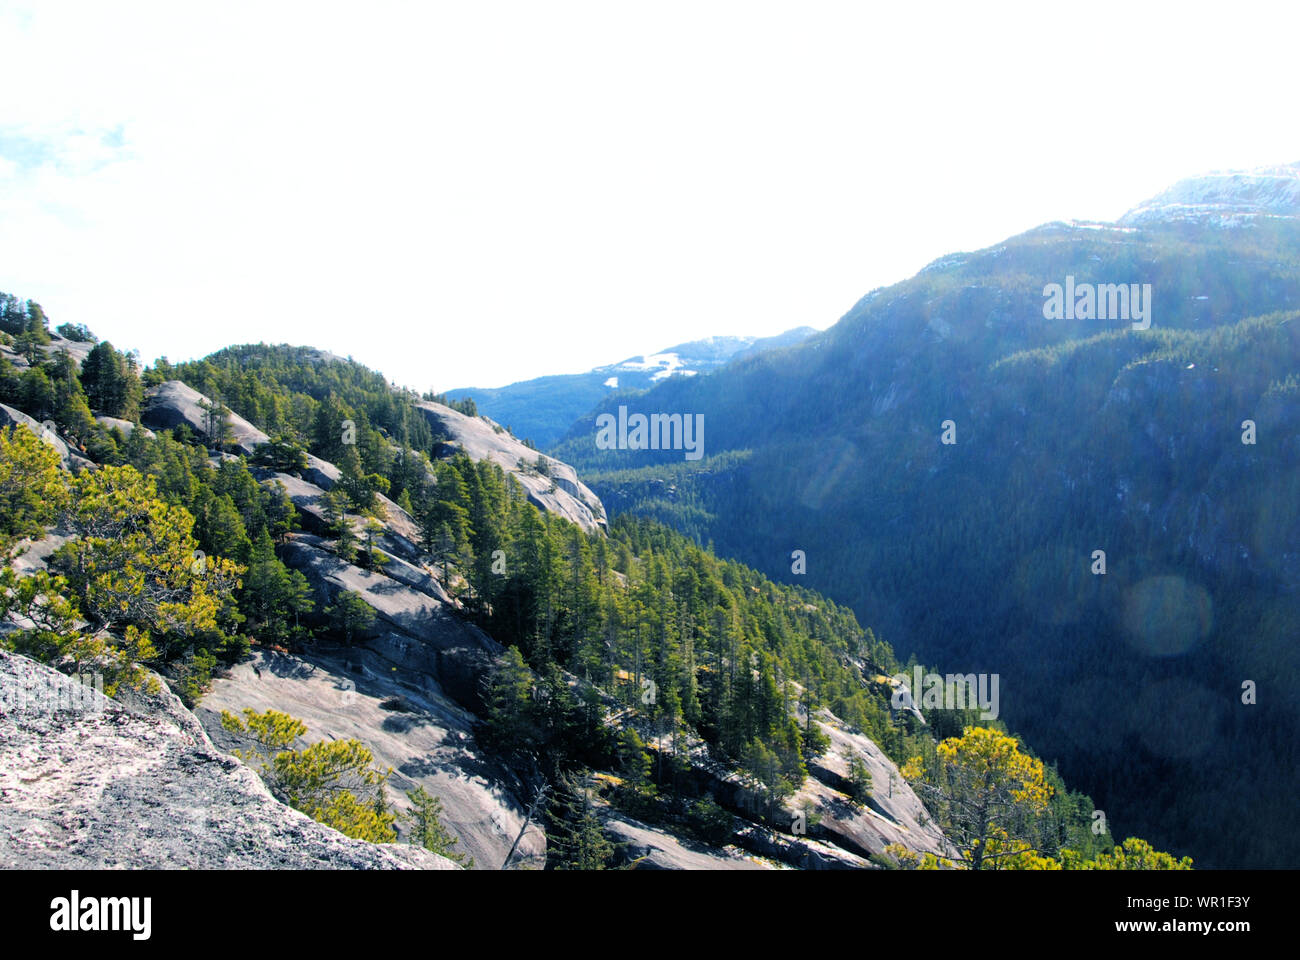 Granite rock and conifer forest views from Stawamus Chief mountain hiking trails, British Columbia, Canada Stock Photo